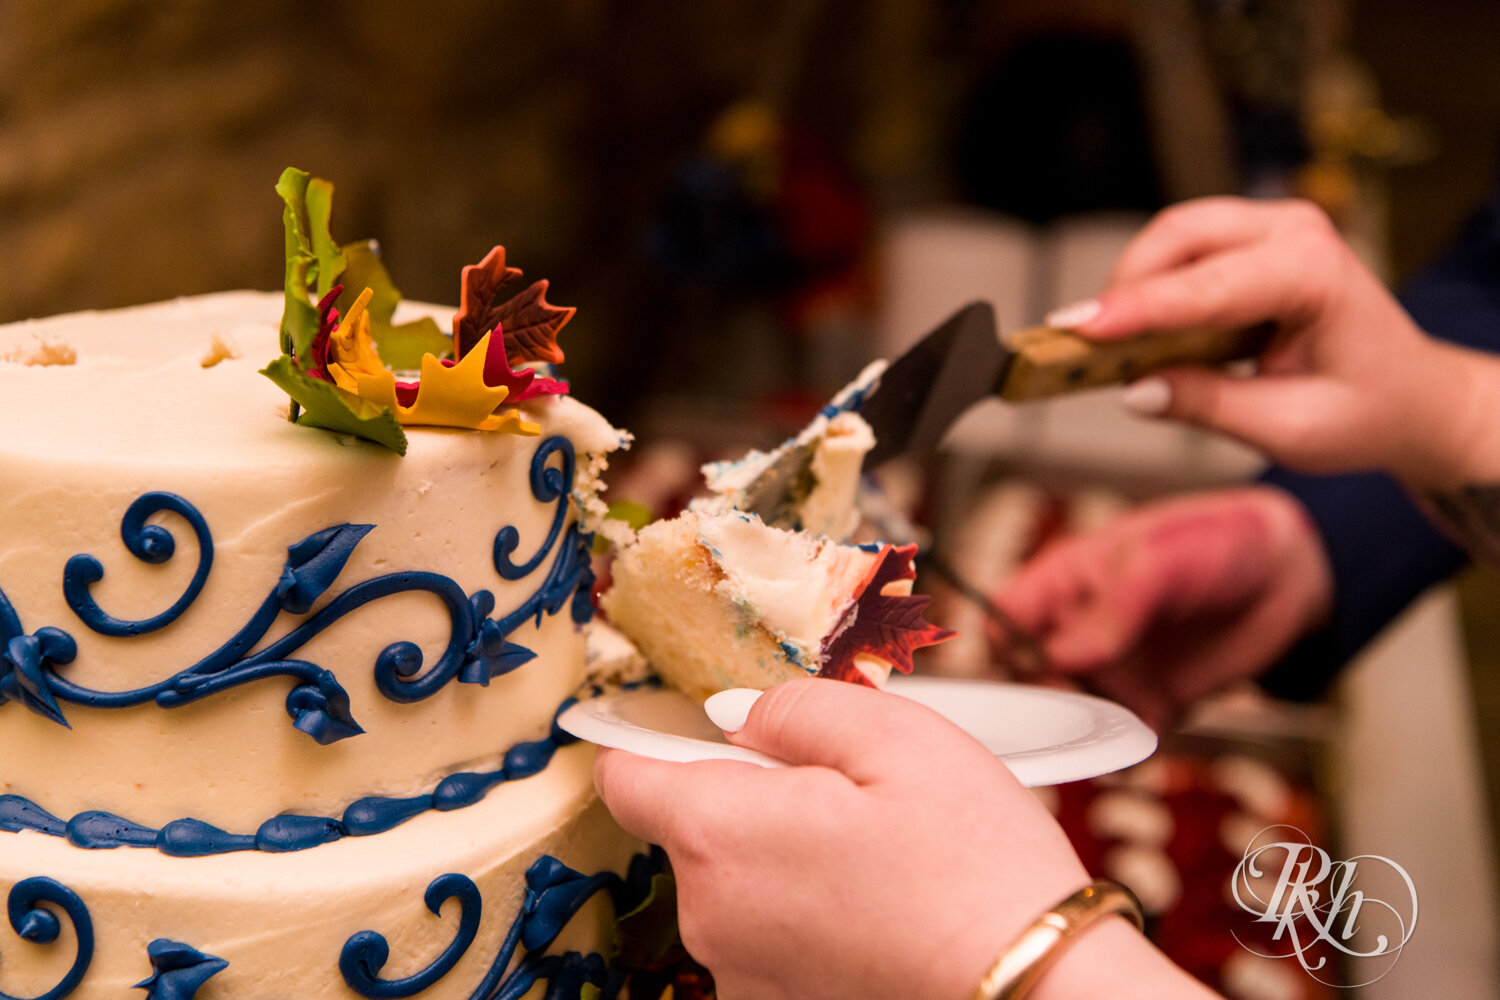 Plus size bride and groom cut cake at wedding reception at Olmsted County Fairgrounds in Rochester, Minnesota.